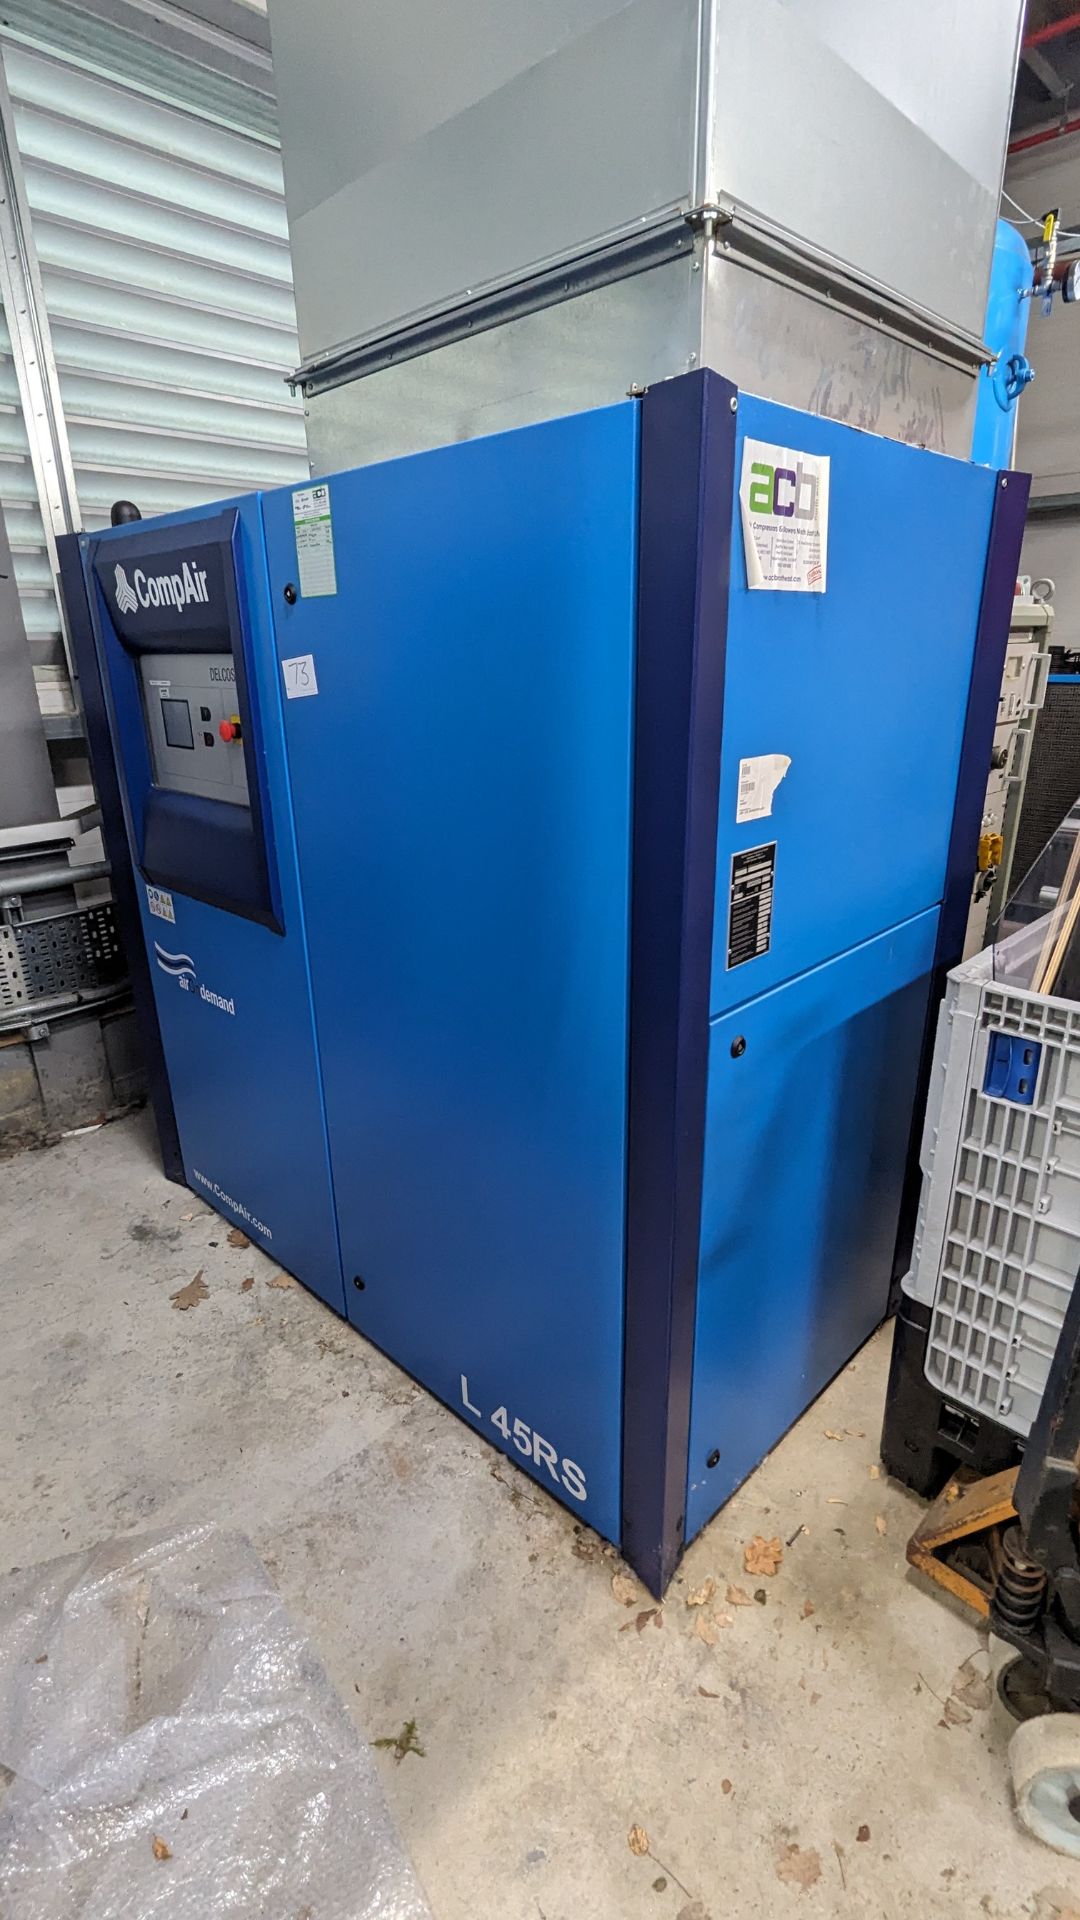 Compair, L45RS-13A, Package Screw Compressor